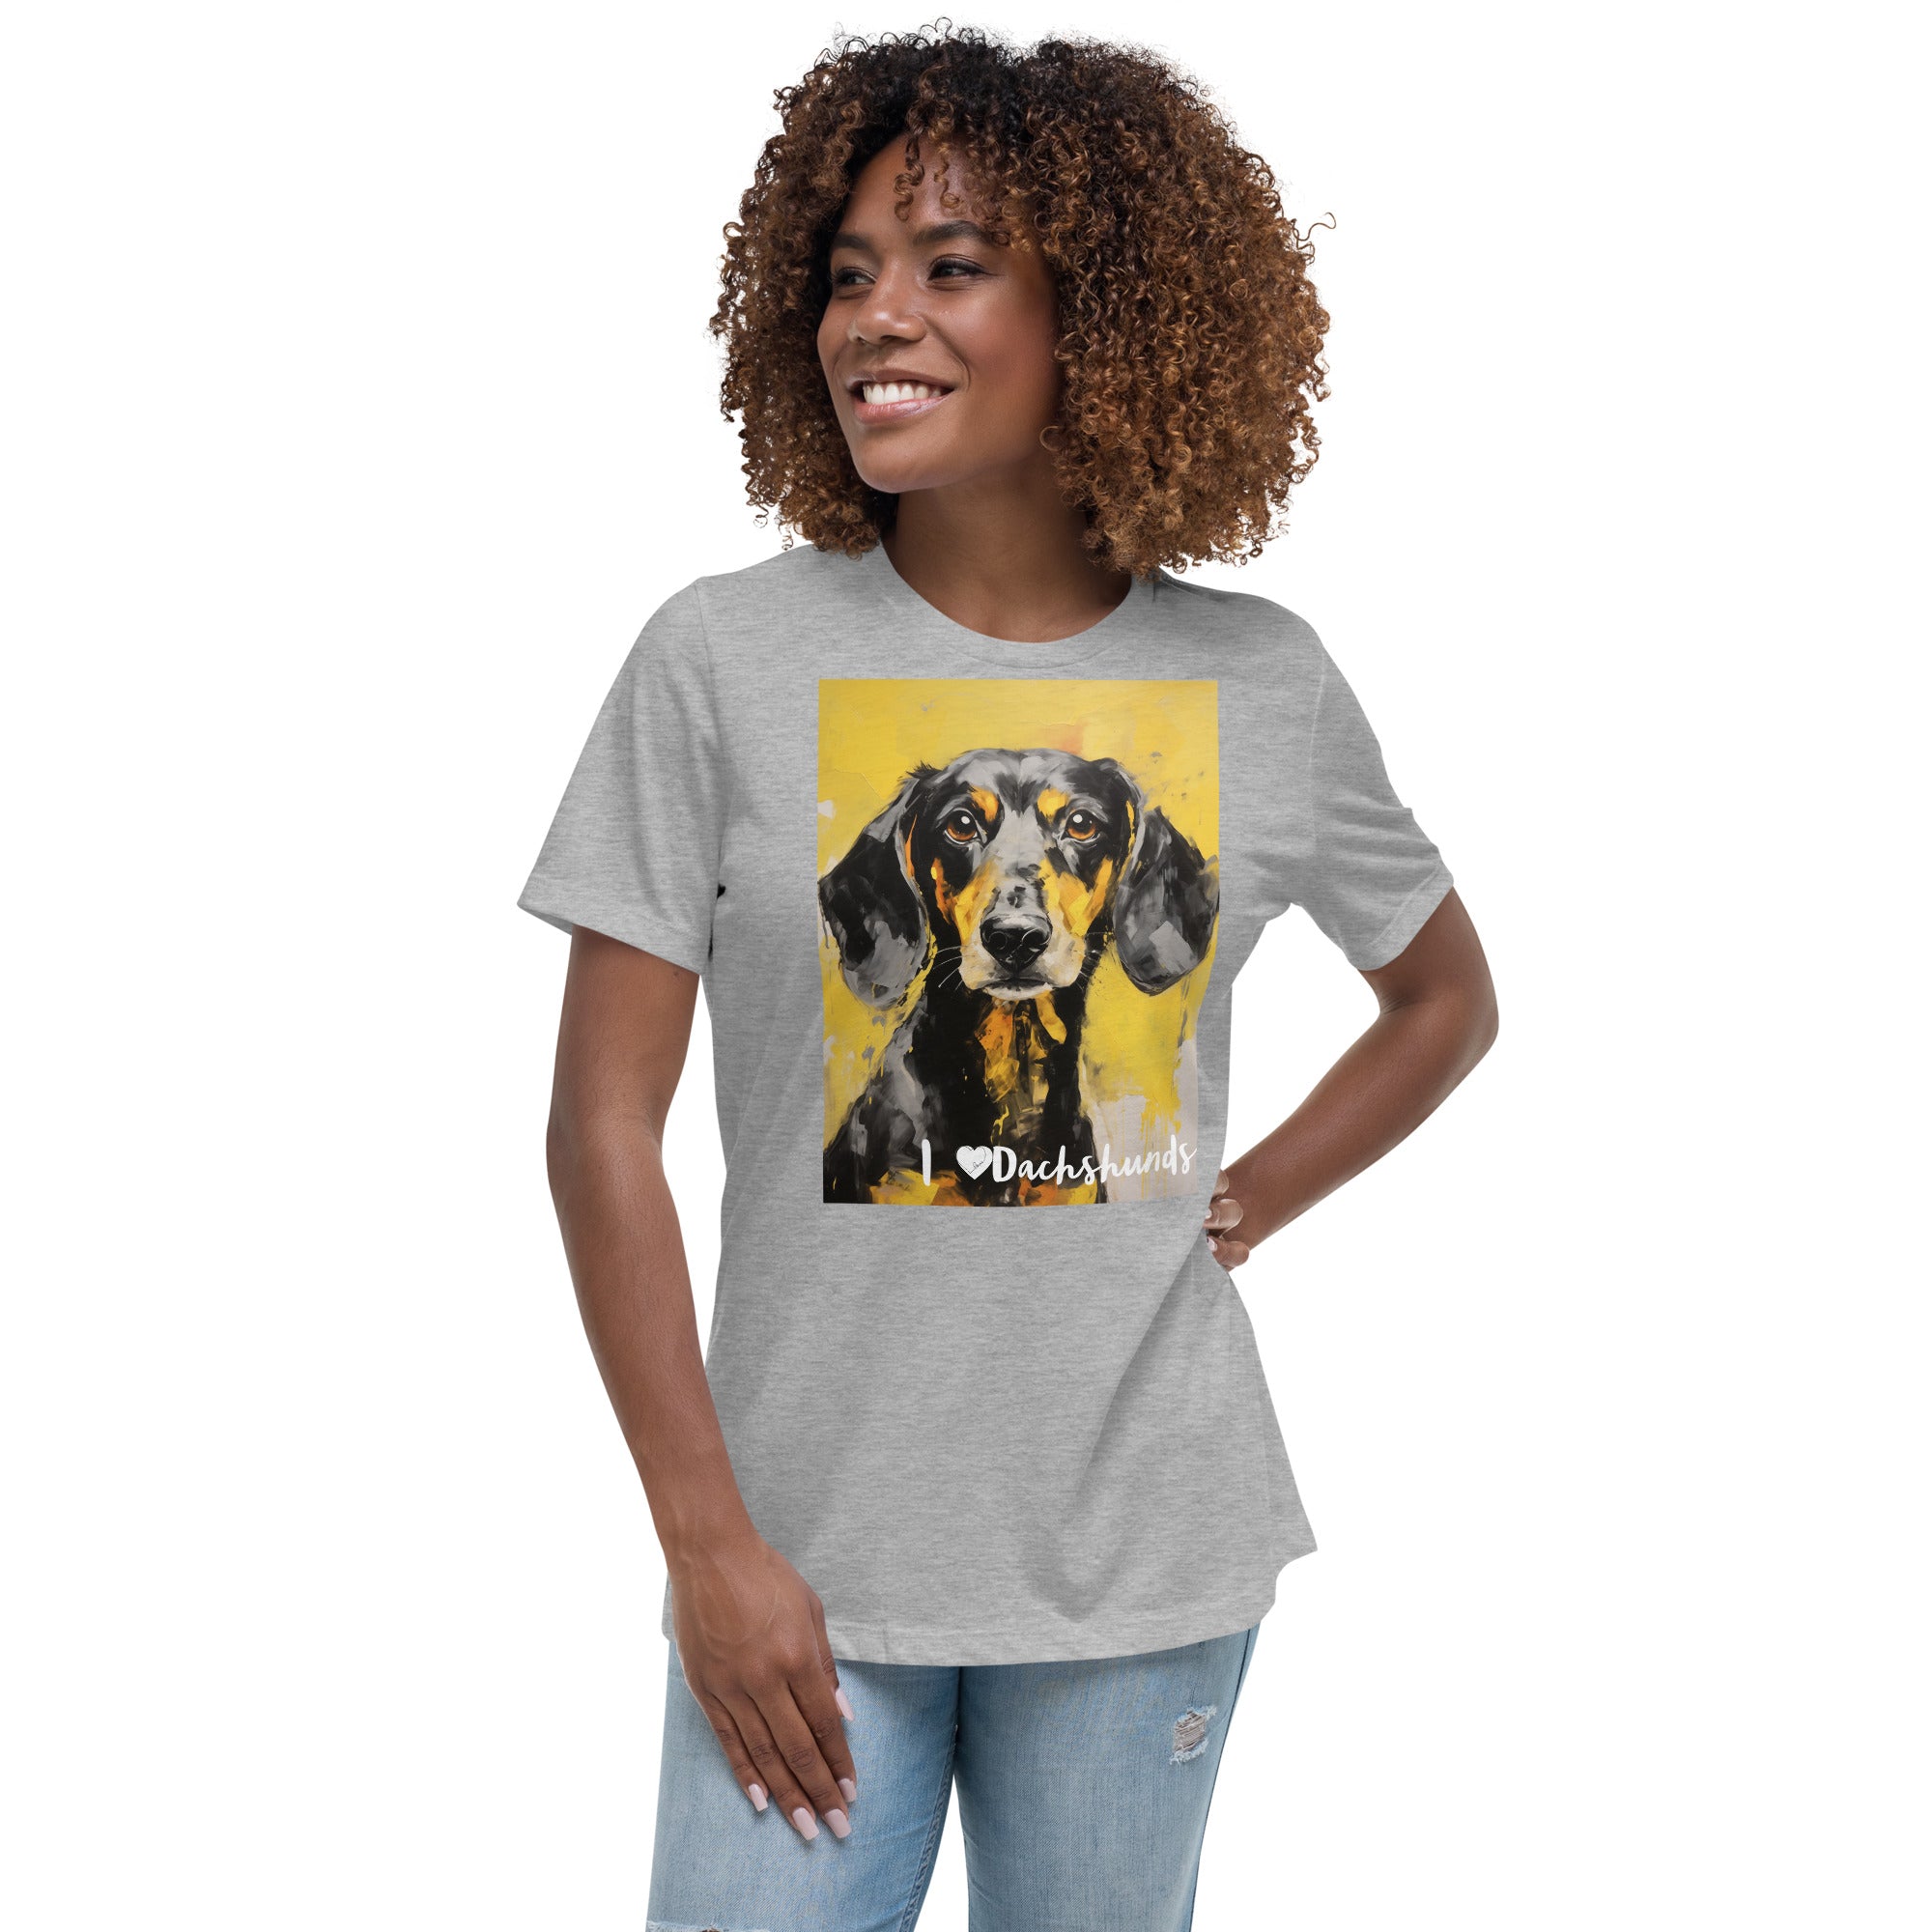 Women's Relaxed T-Shirt - I ❤ Dogs - Dachshund